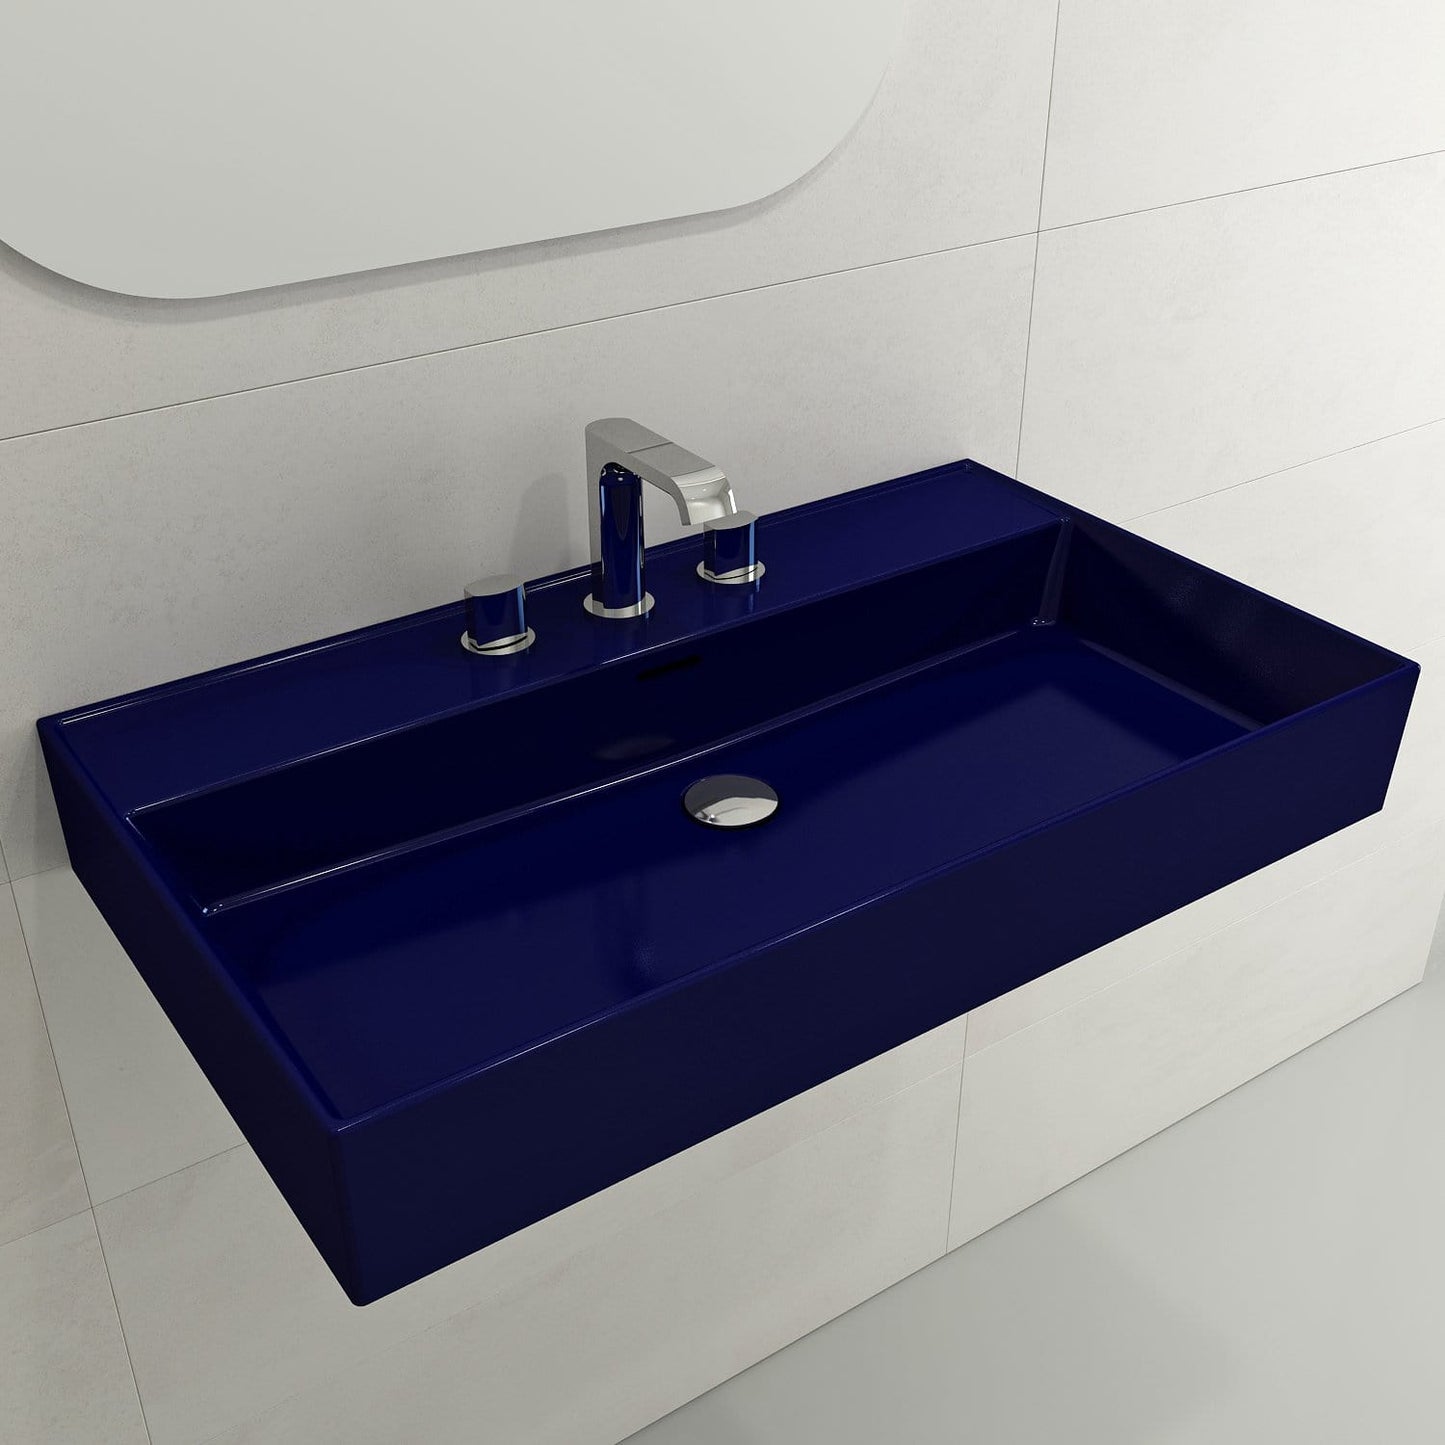 BOCCHI MILANO 32" Wall-Mounted Sink Fireclay 3-Hole With Overflow